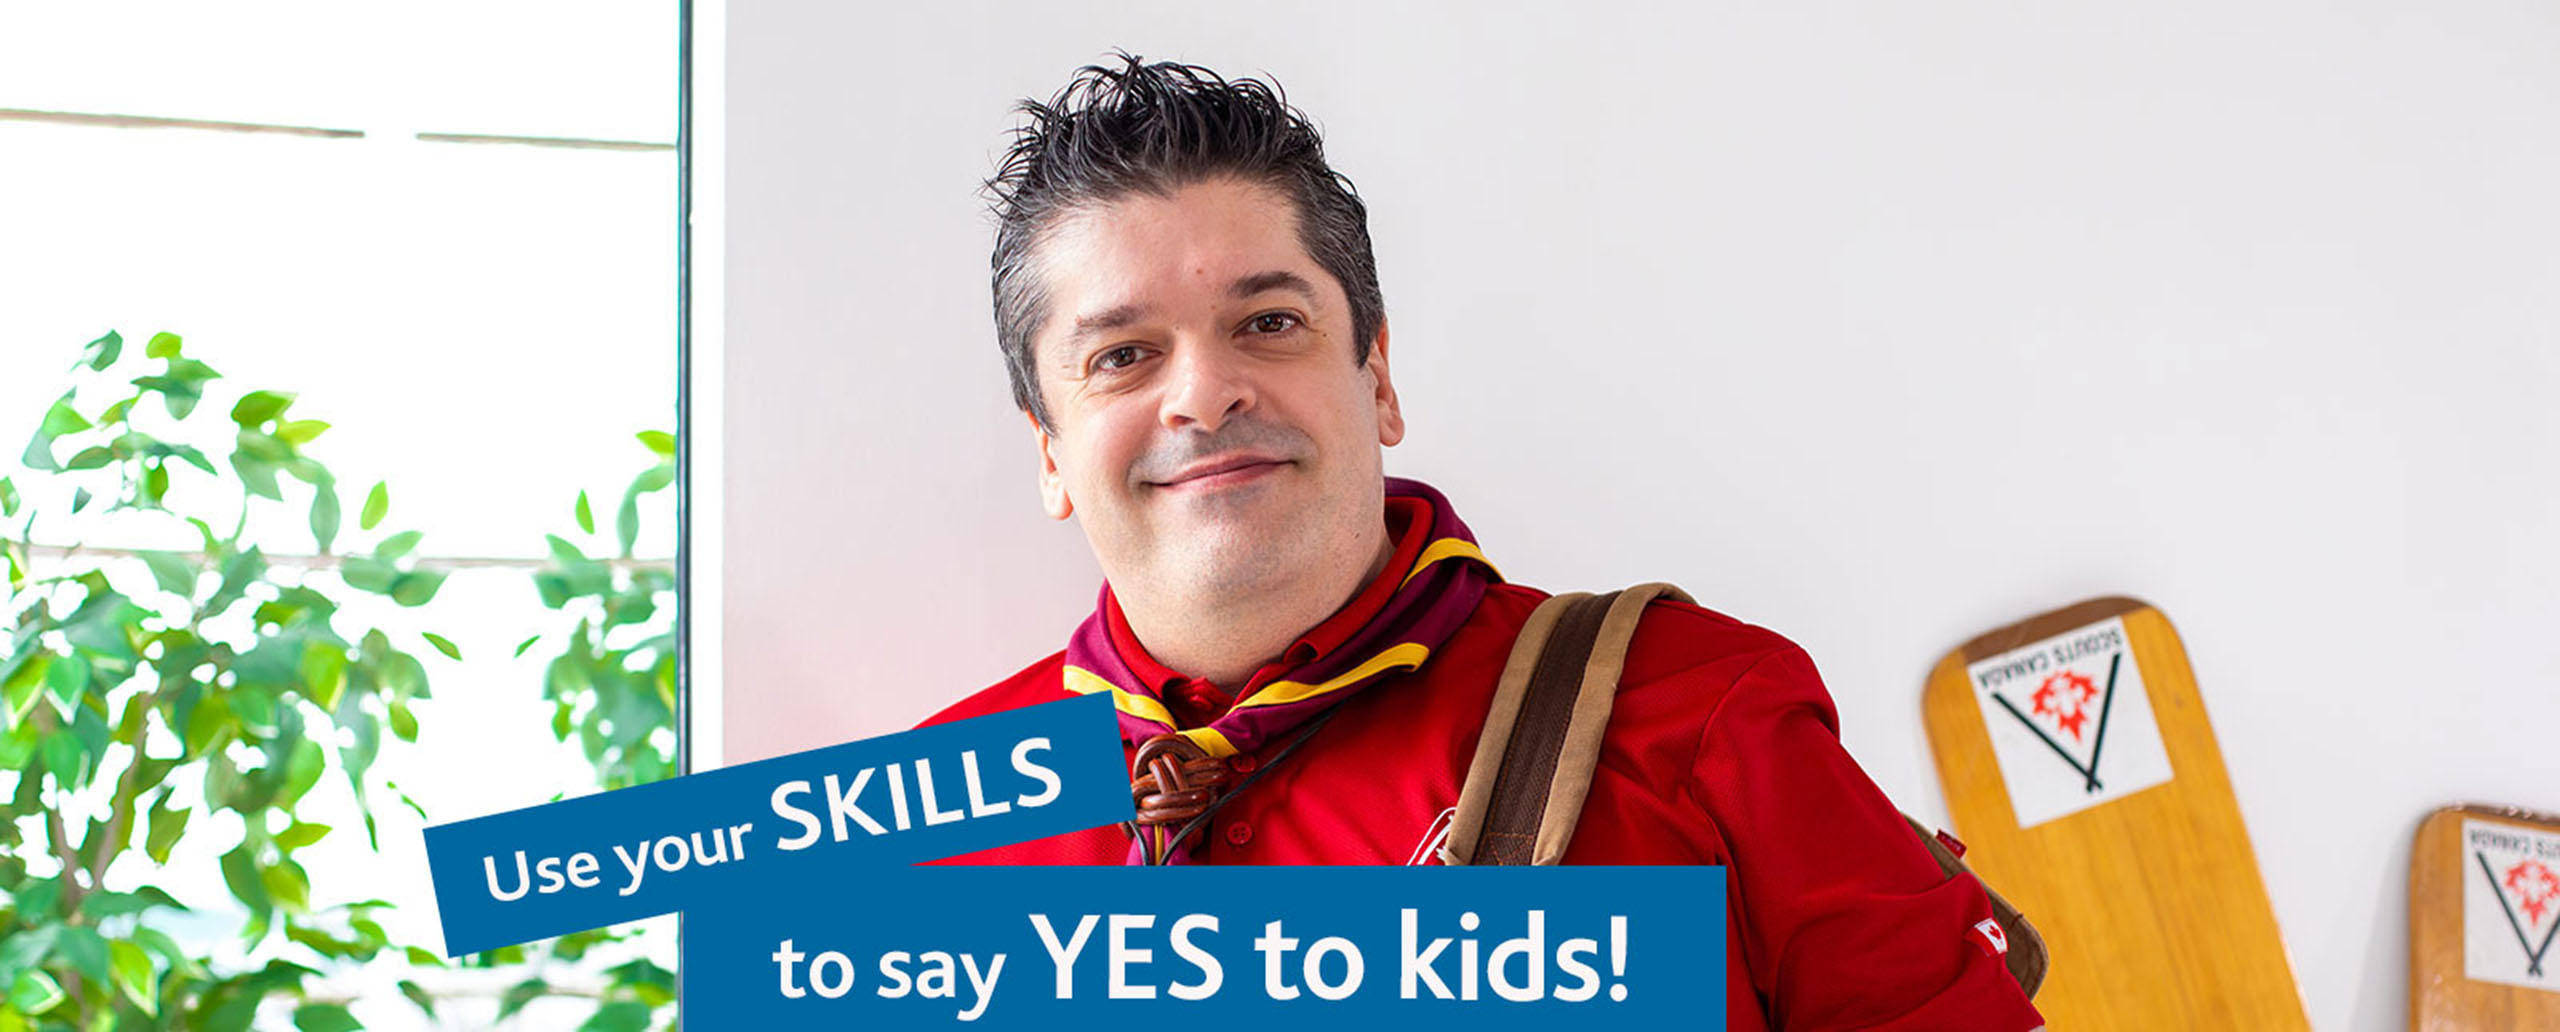 Use your skills to say YES to Kids!